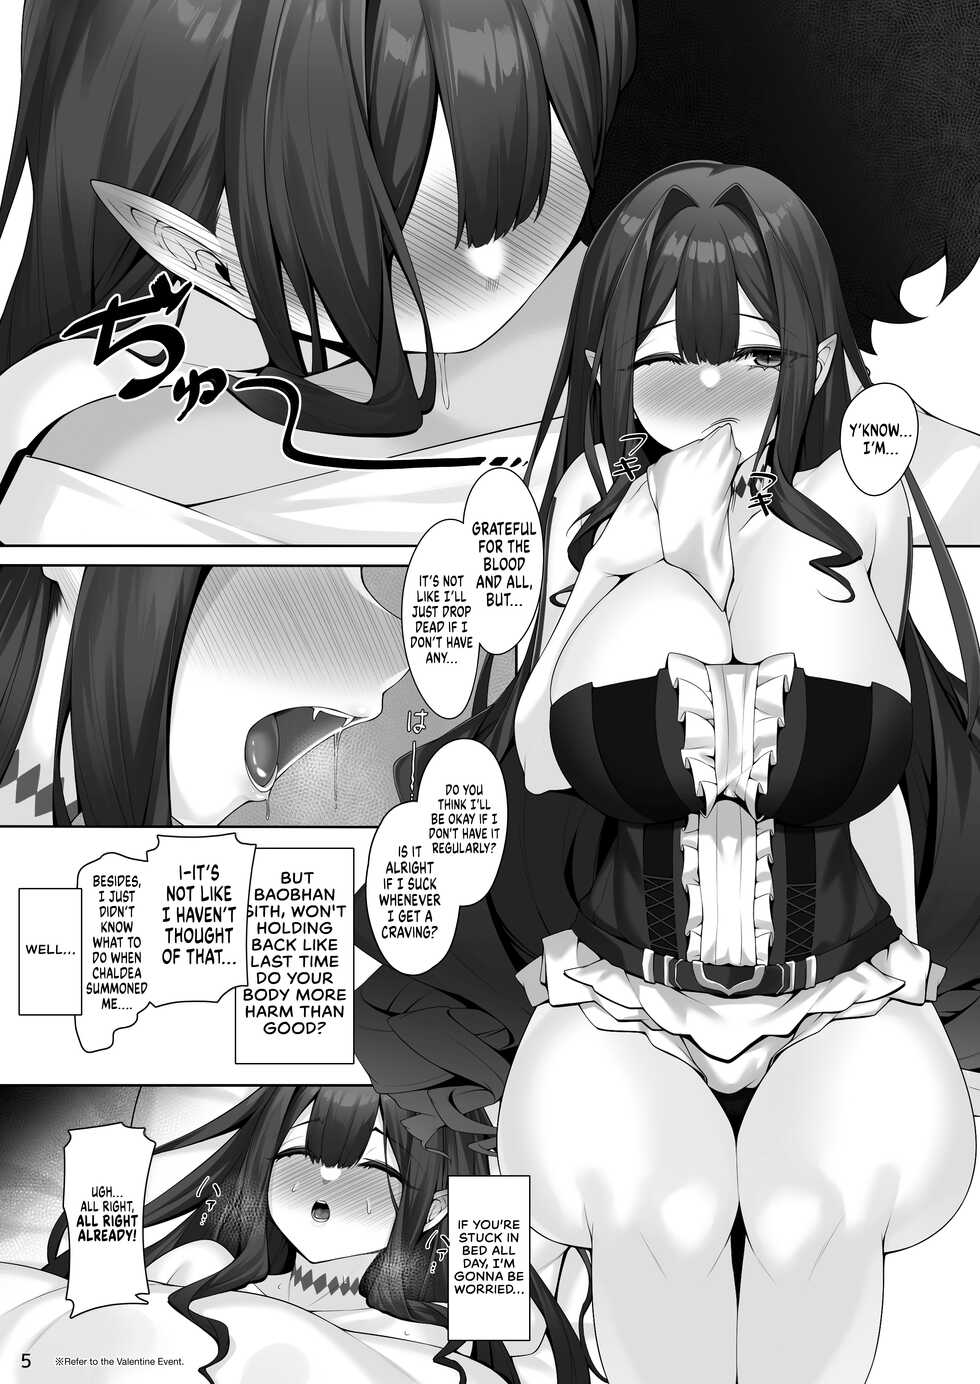 [Watochip Melonpan (Watosu)] Baobhan Sith to Iroiro Ecchi Hon | Various Dirty Deeds with Baobhan Sith (Fate/Grand Order) [English] [UncontrolSwitchOverflow] [Digital] - Page 5